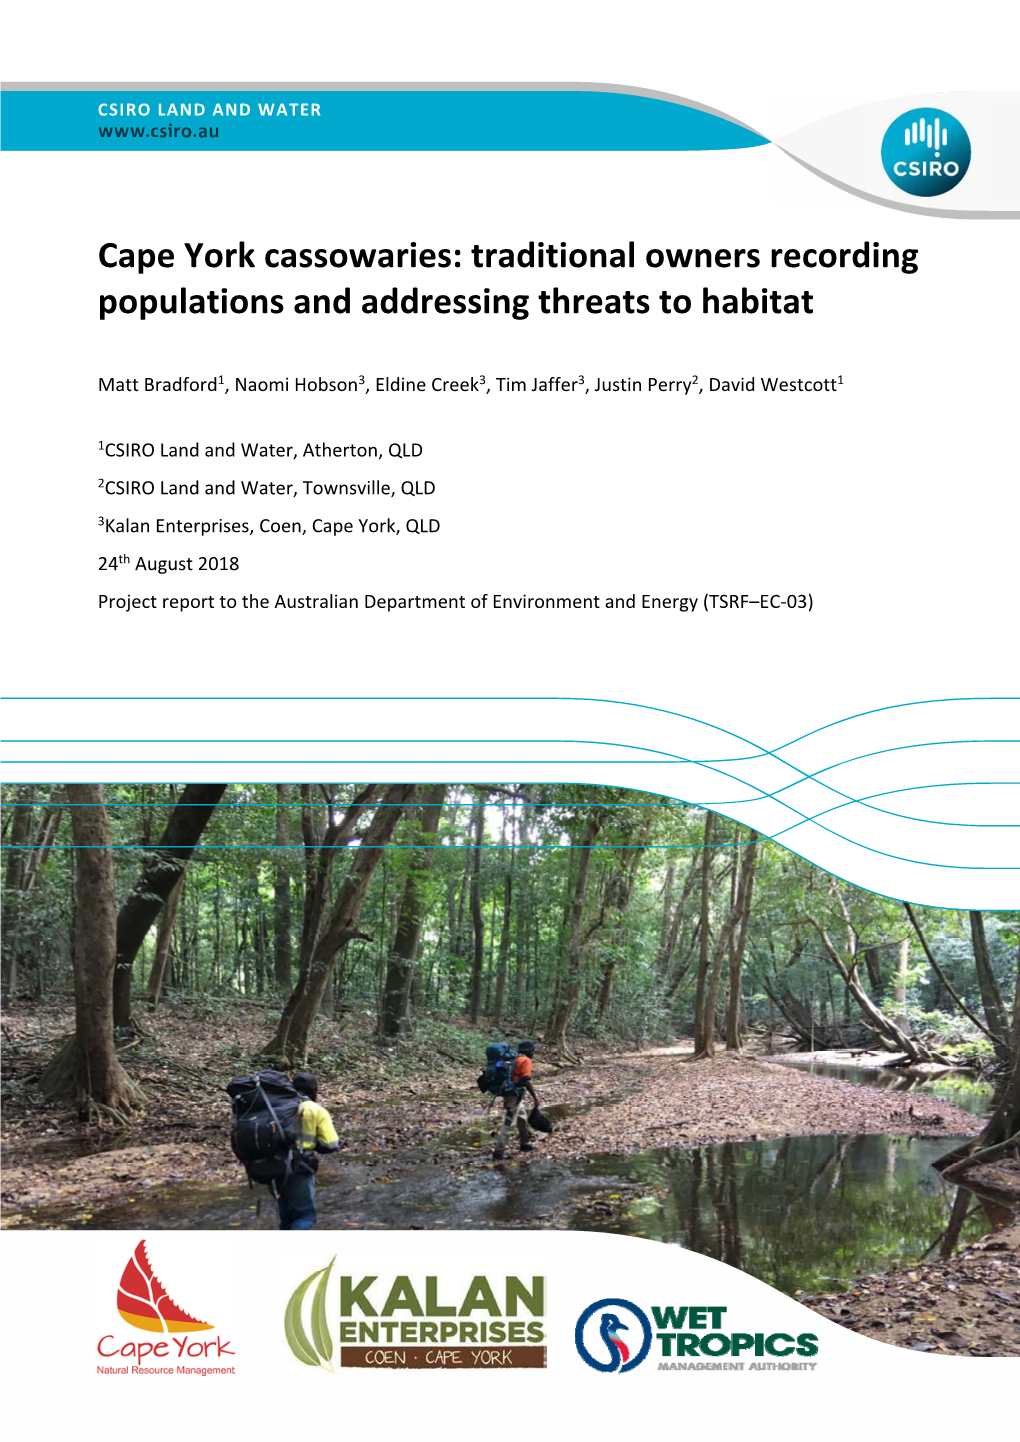 Cape York Cassowaries: Traditional Owners Recording Populations and Addressing Threats to Habitat